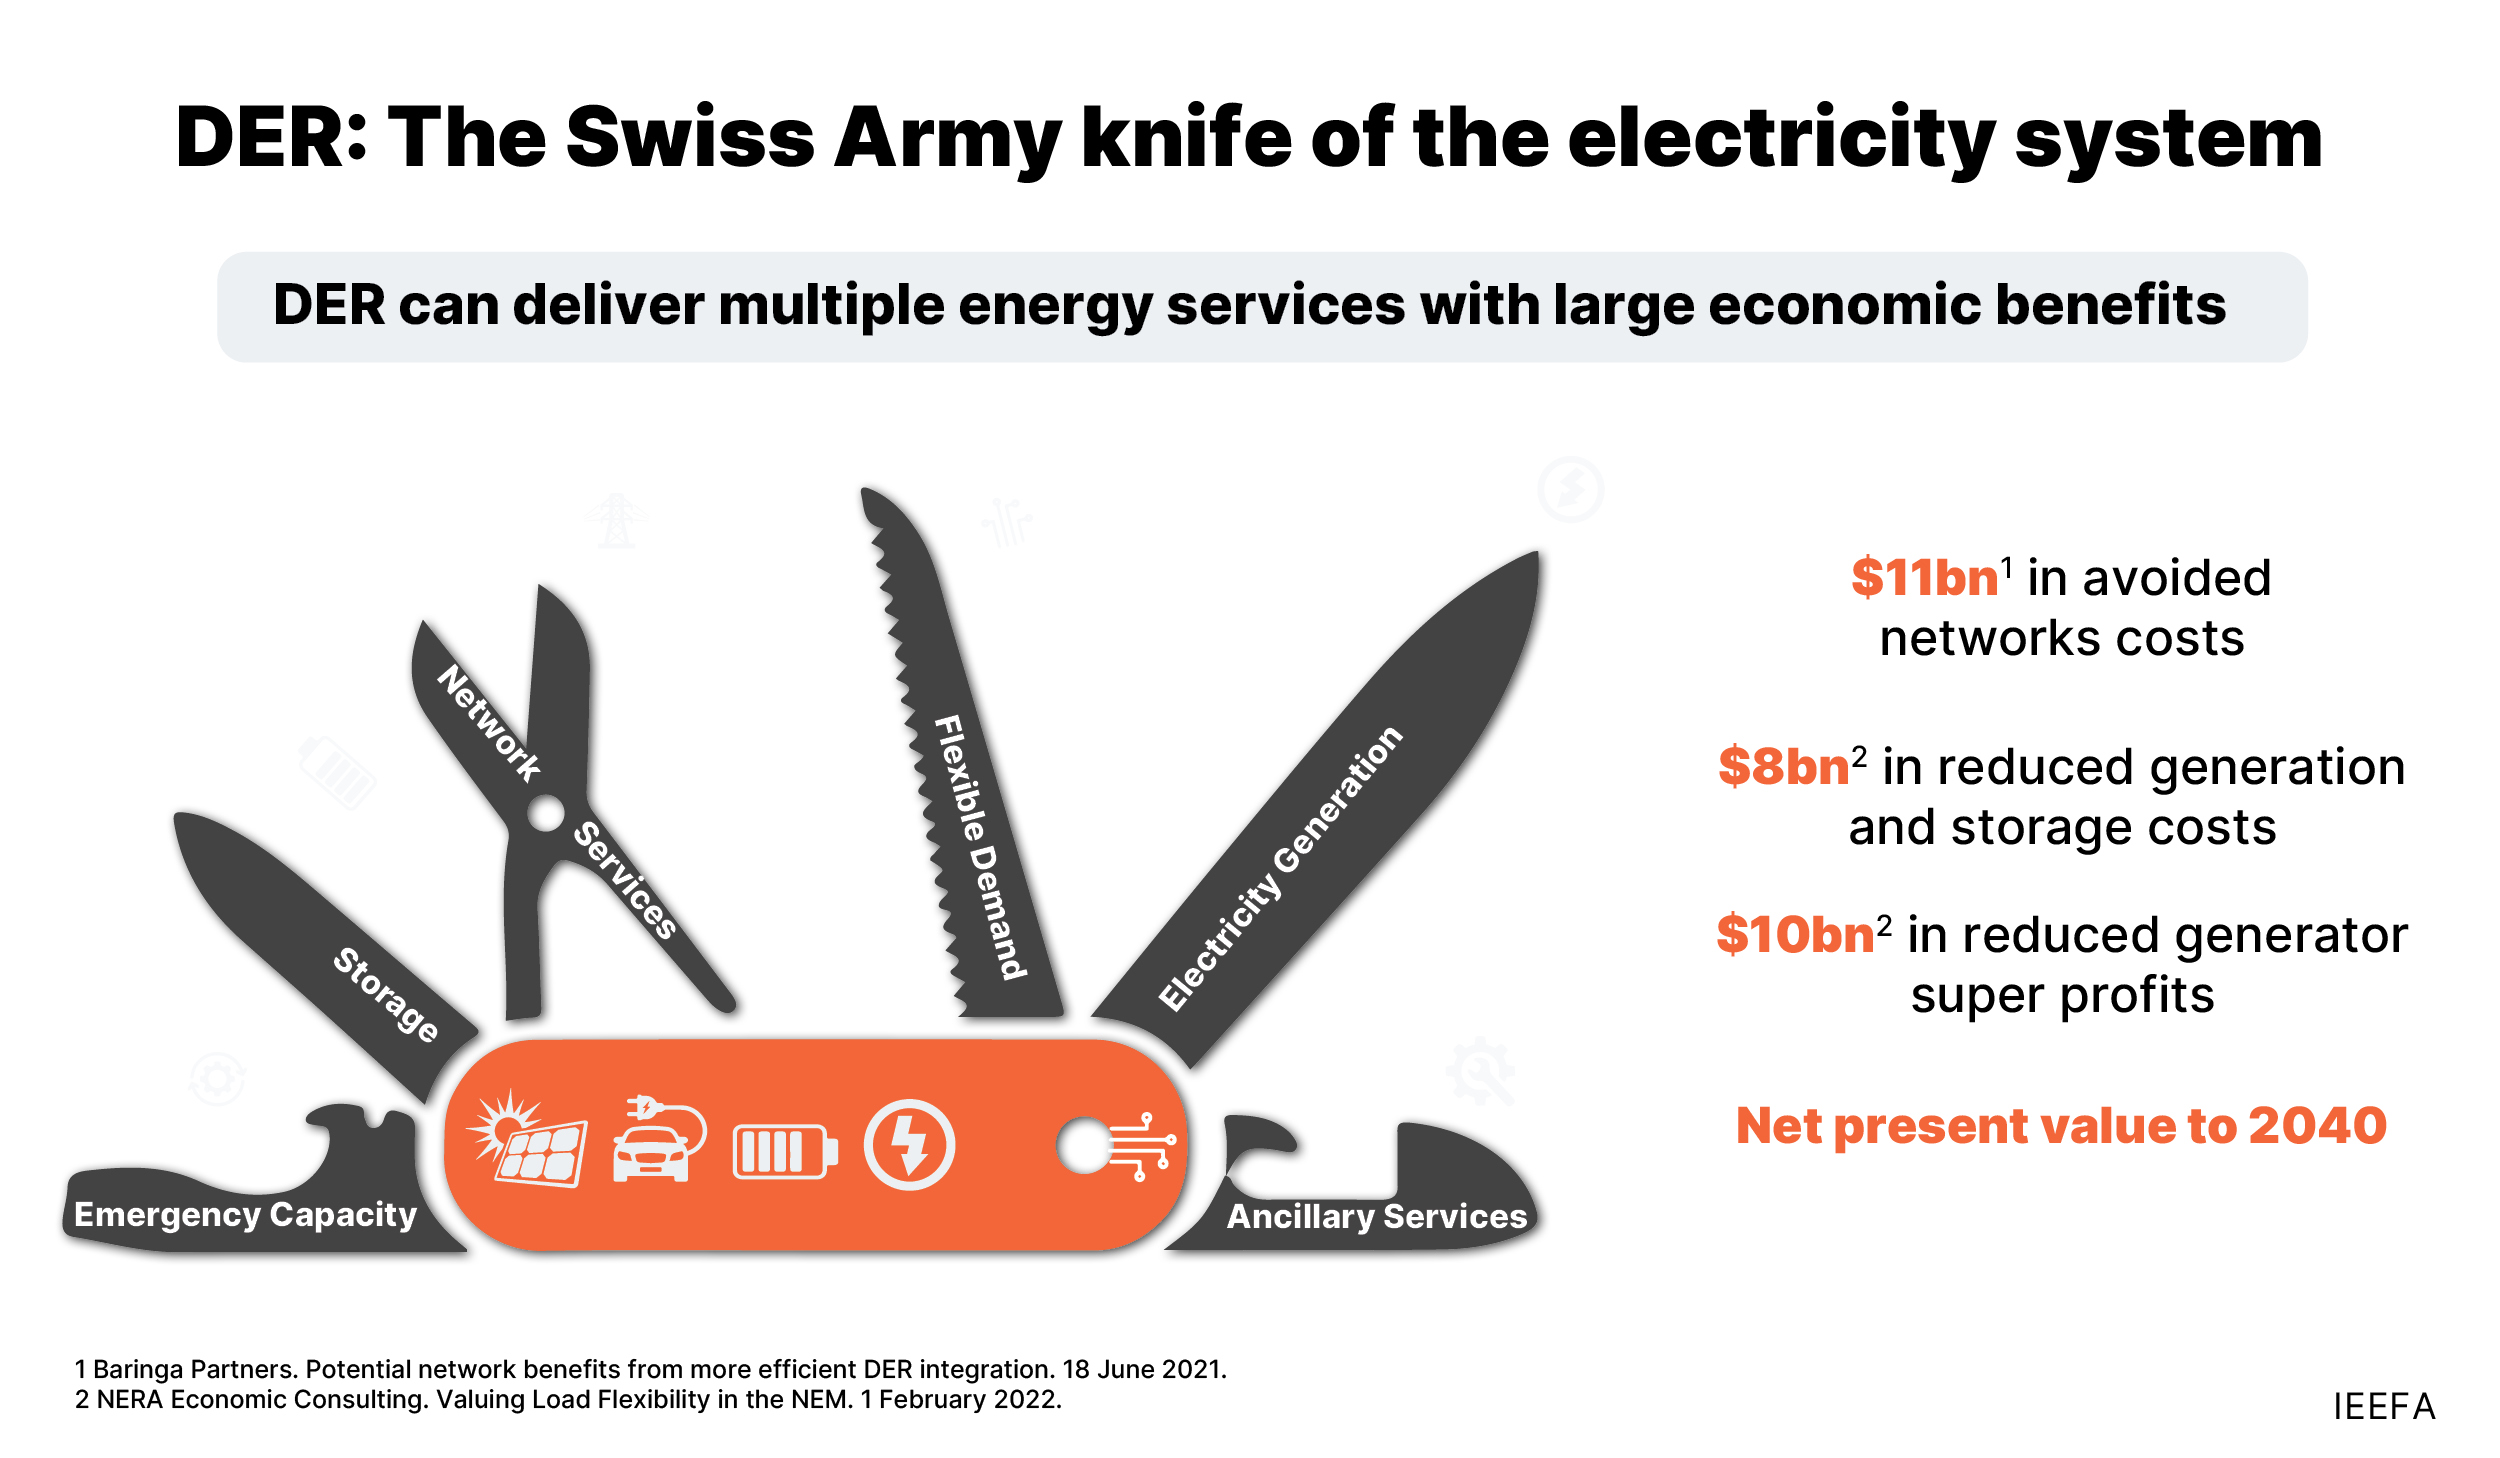 DER is the Swiss army knife of the electricity system